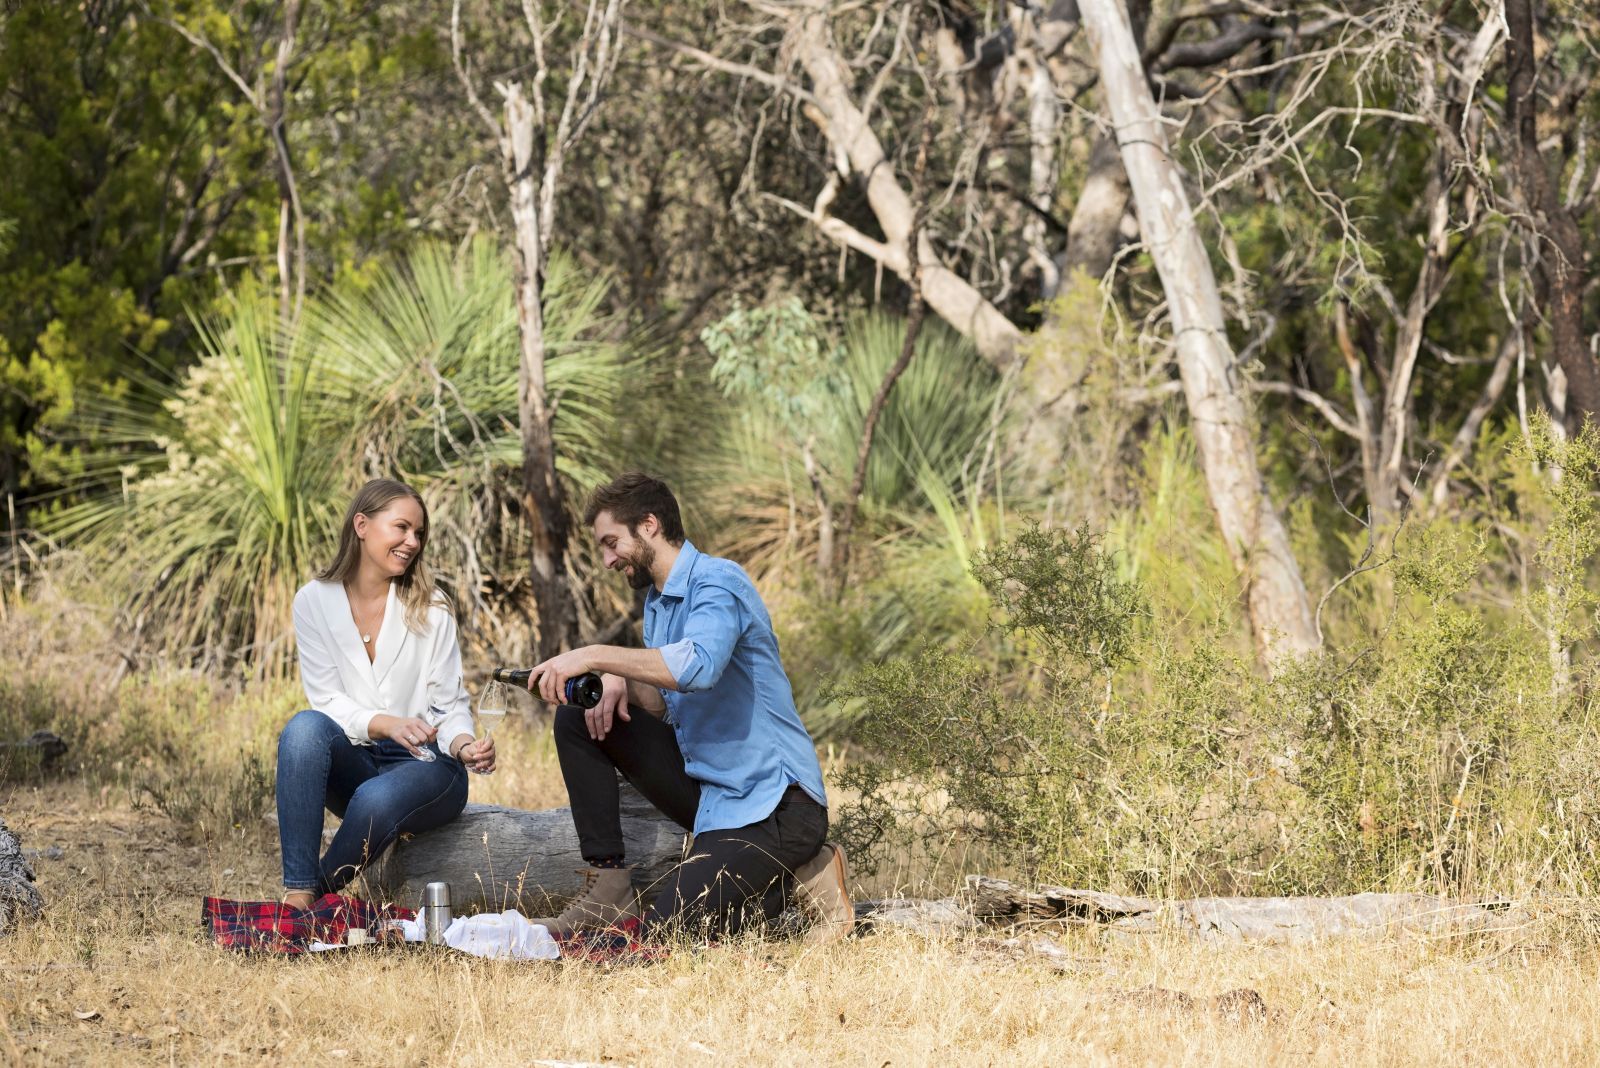 Young couple enjoying an outdoor picnic with prosecco